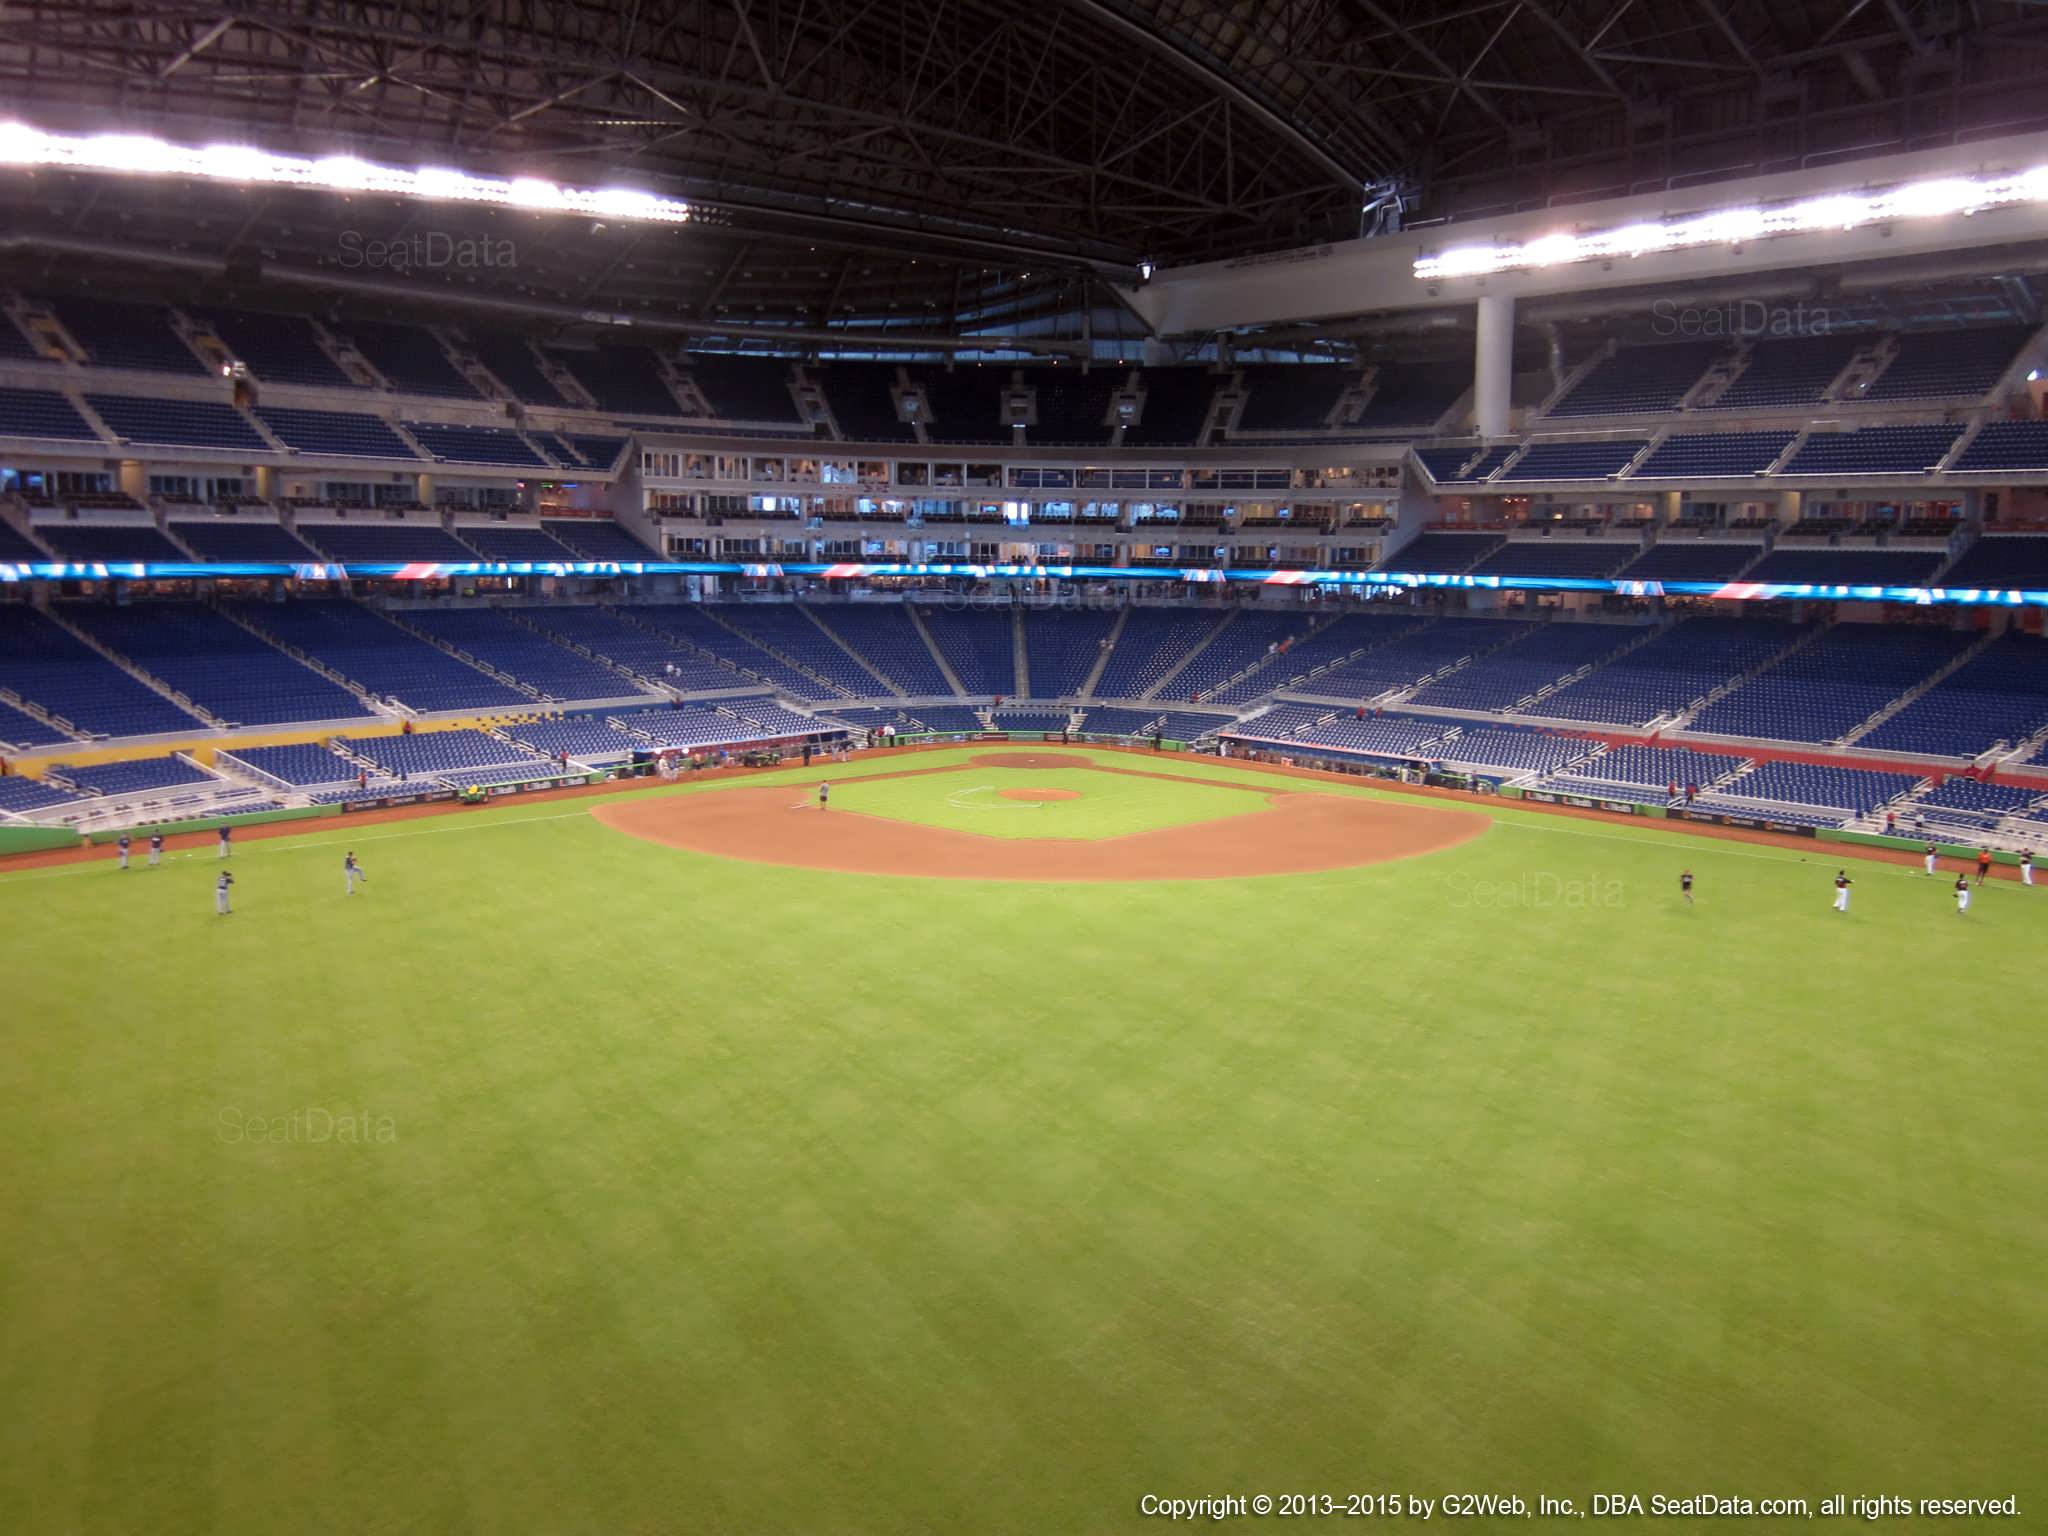 Seat view from section 134 at Marlins Park, home of the Miami Marlins